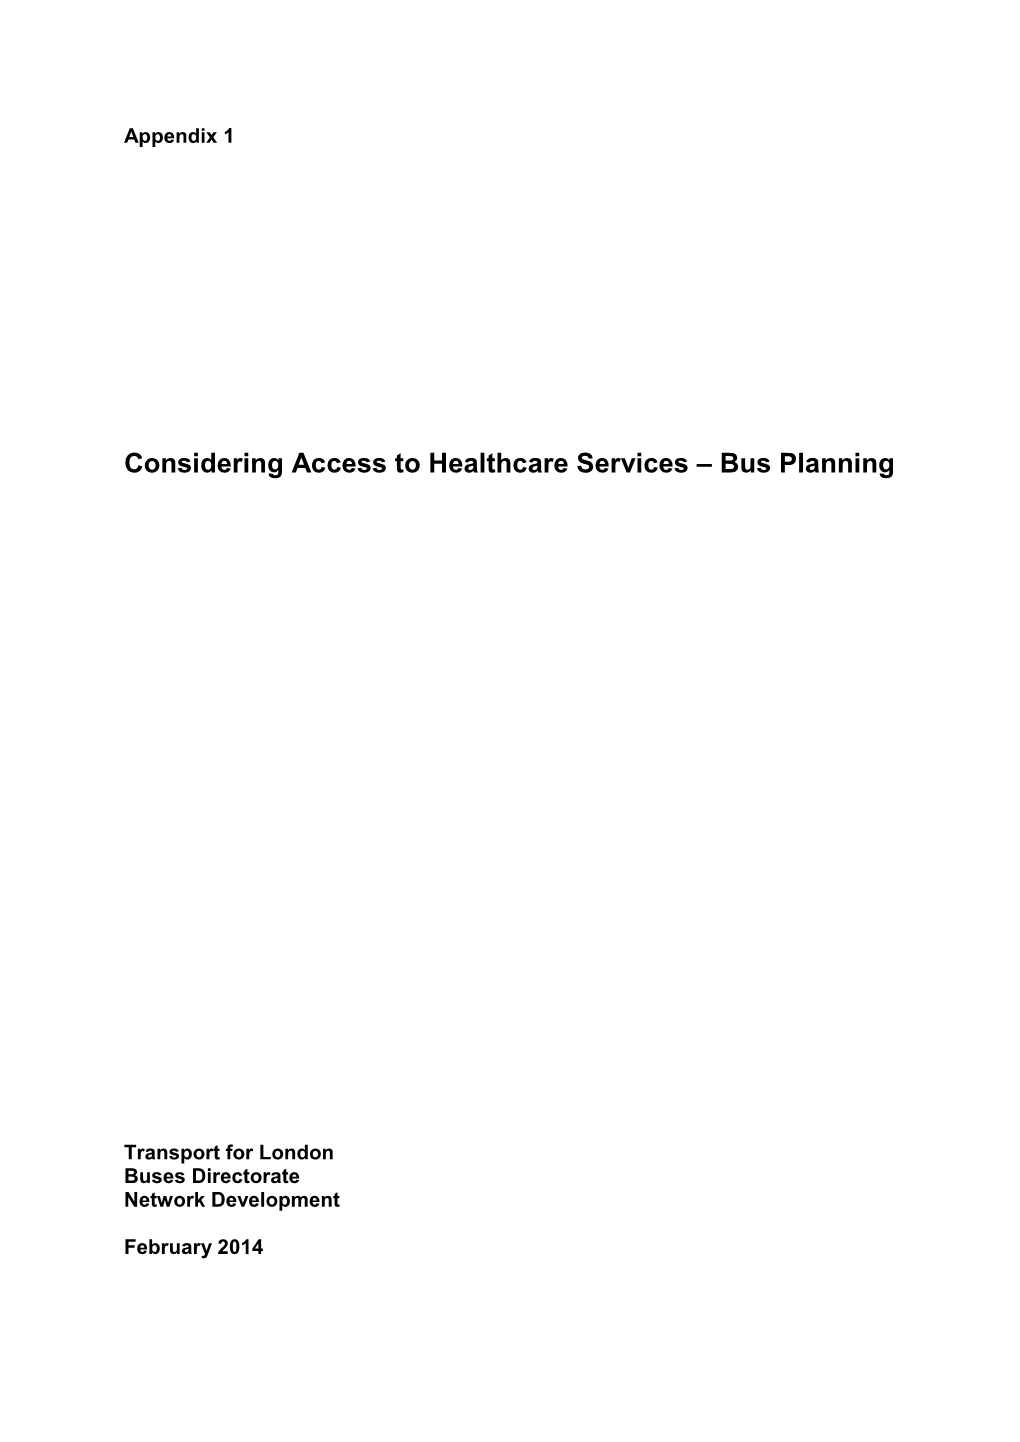 Considering Access to Healthcare Services – Bus Planning